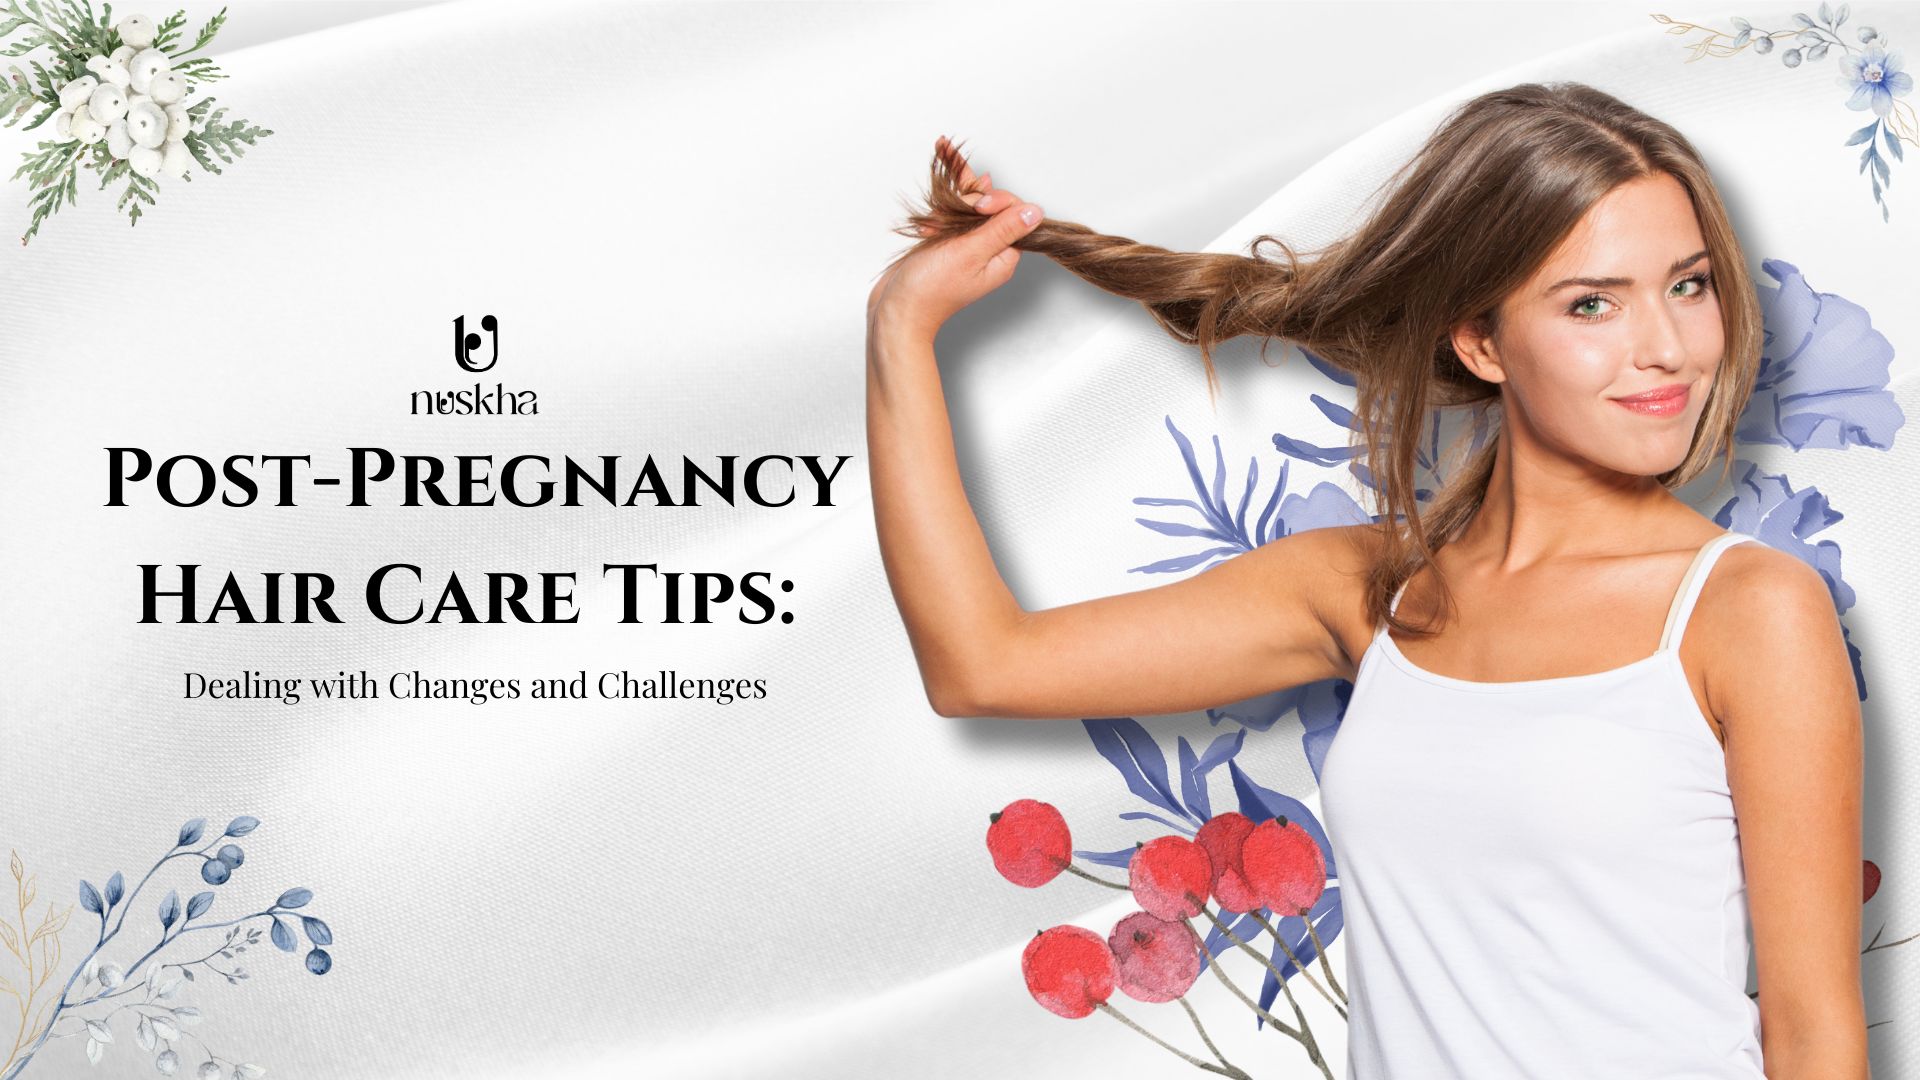 Post-Pregnancy Hair Care Tips: Dealing with Changes and Challenges